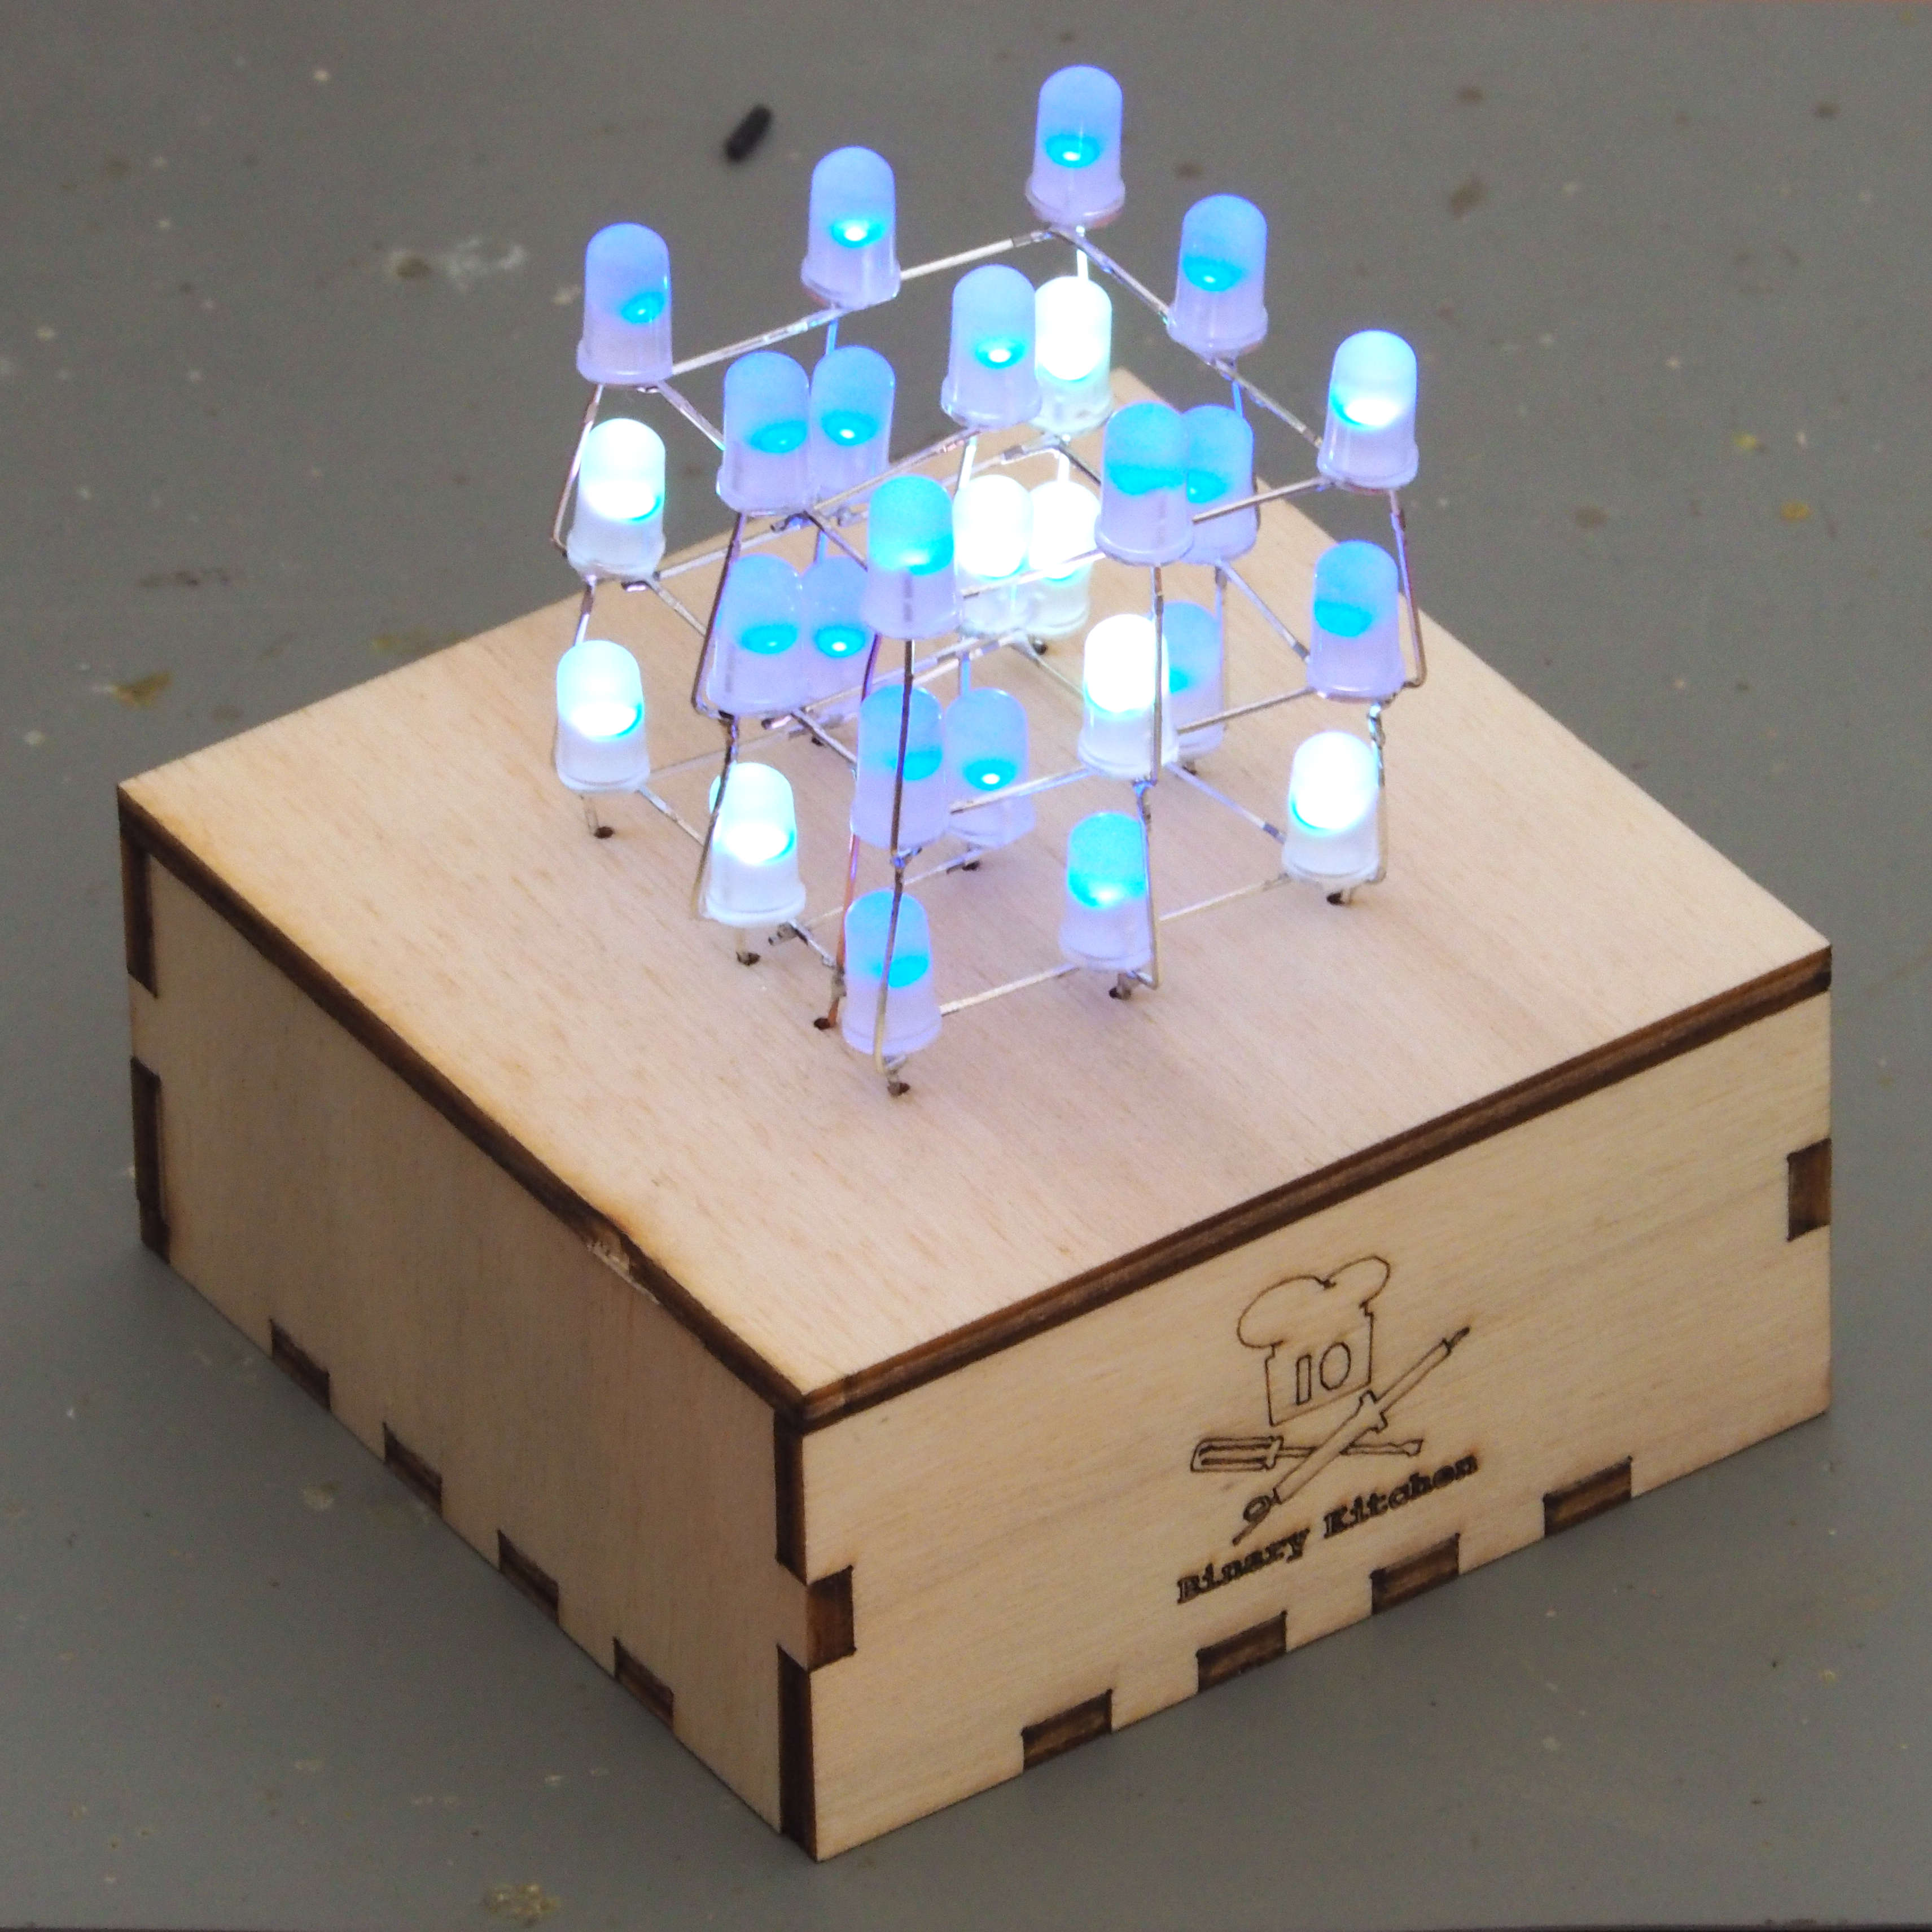 LED Cube - A colorful LED 3D cube with 27 colorful glowing LEDs